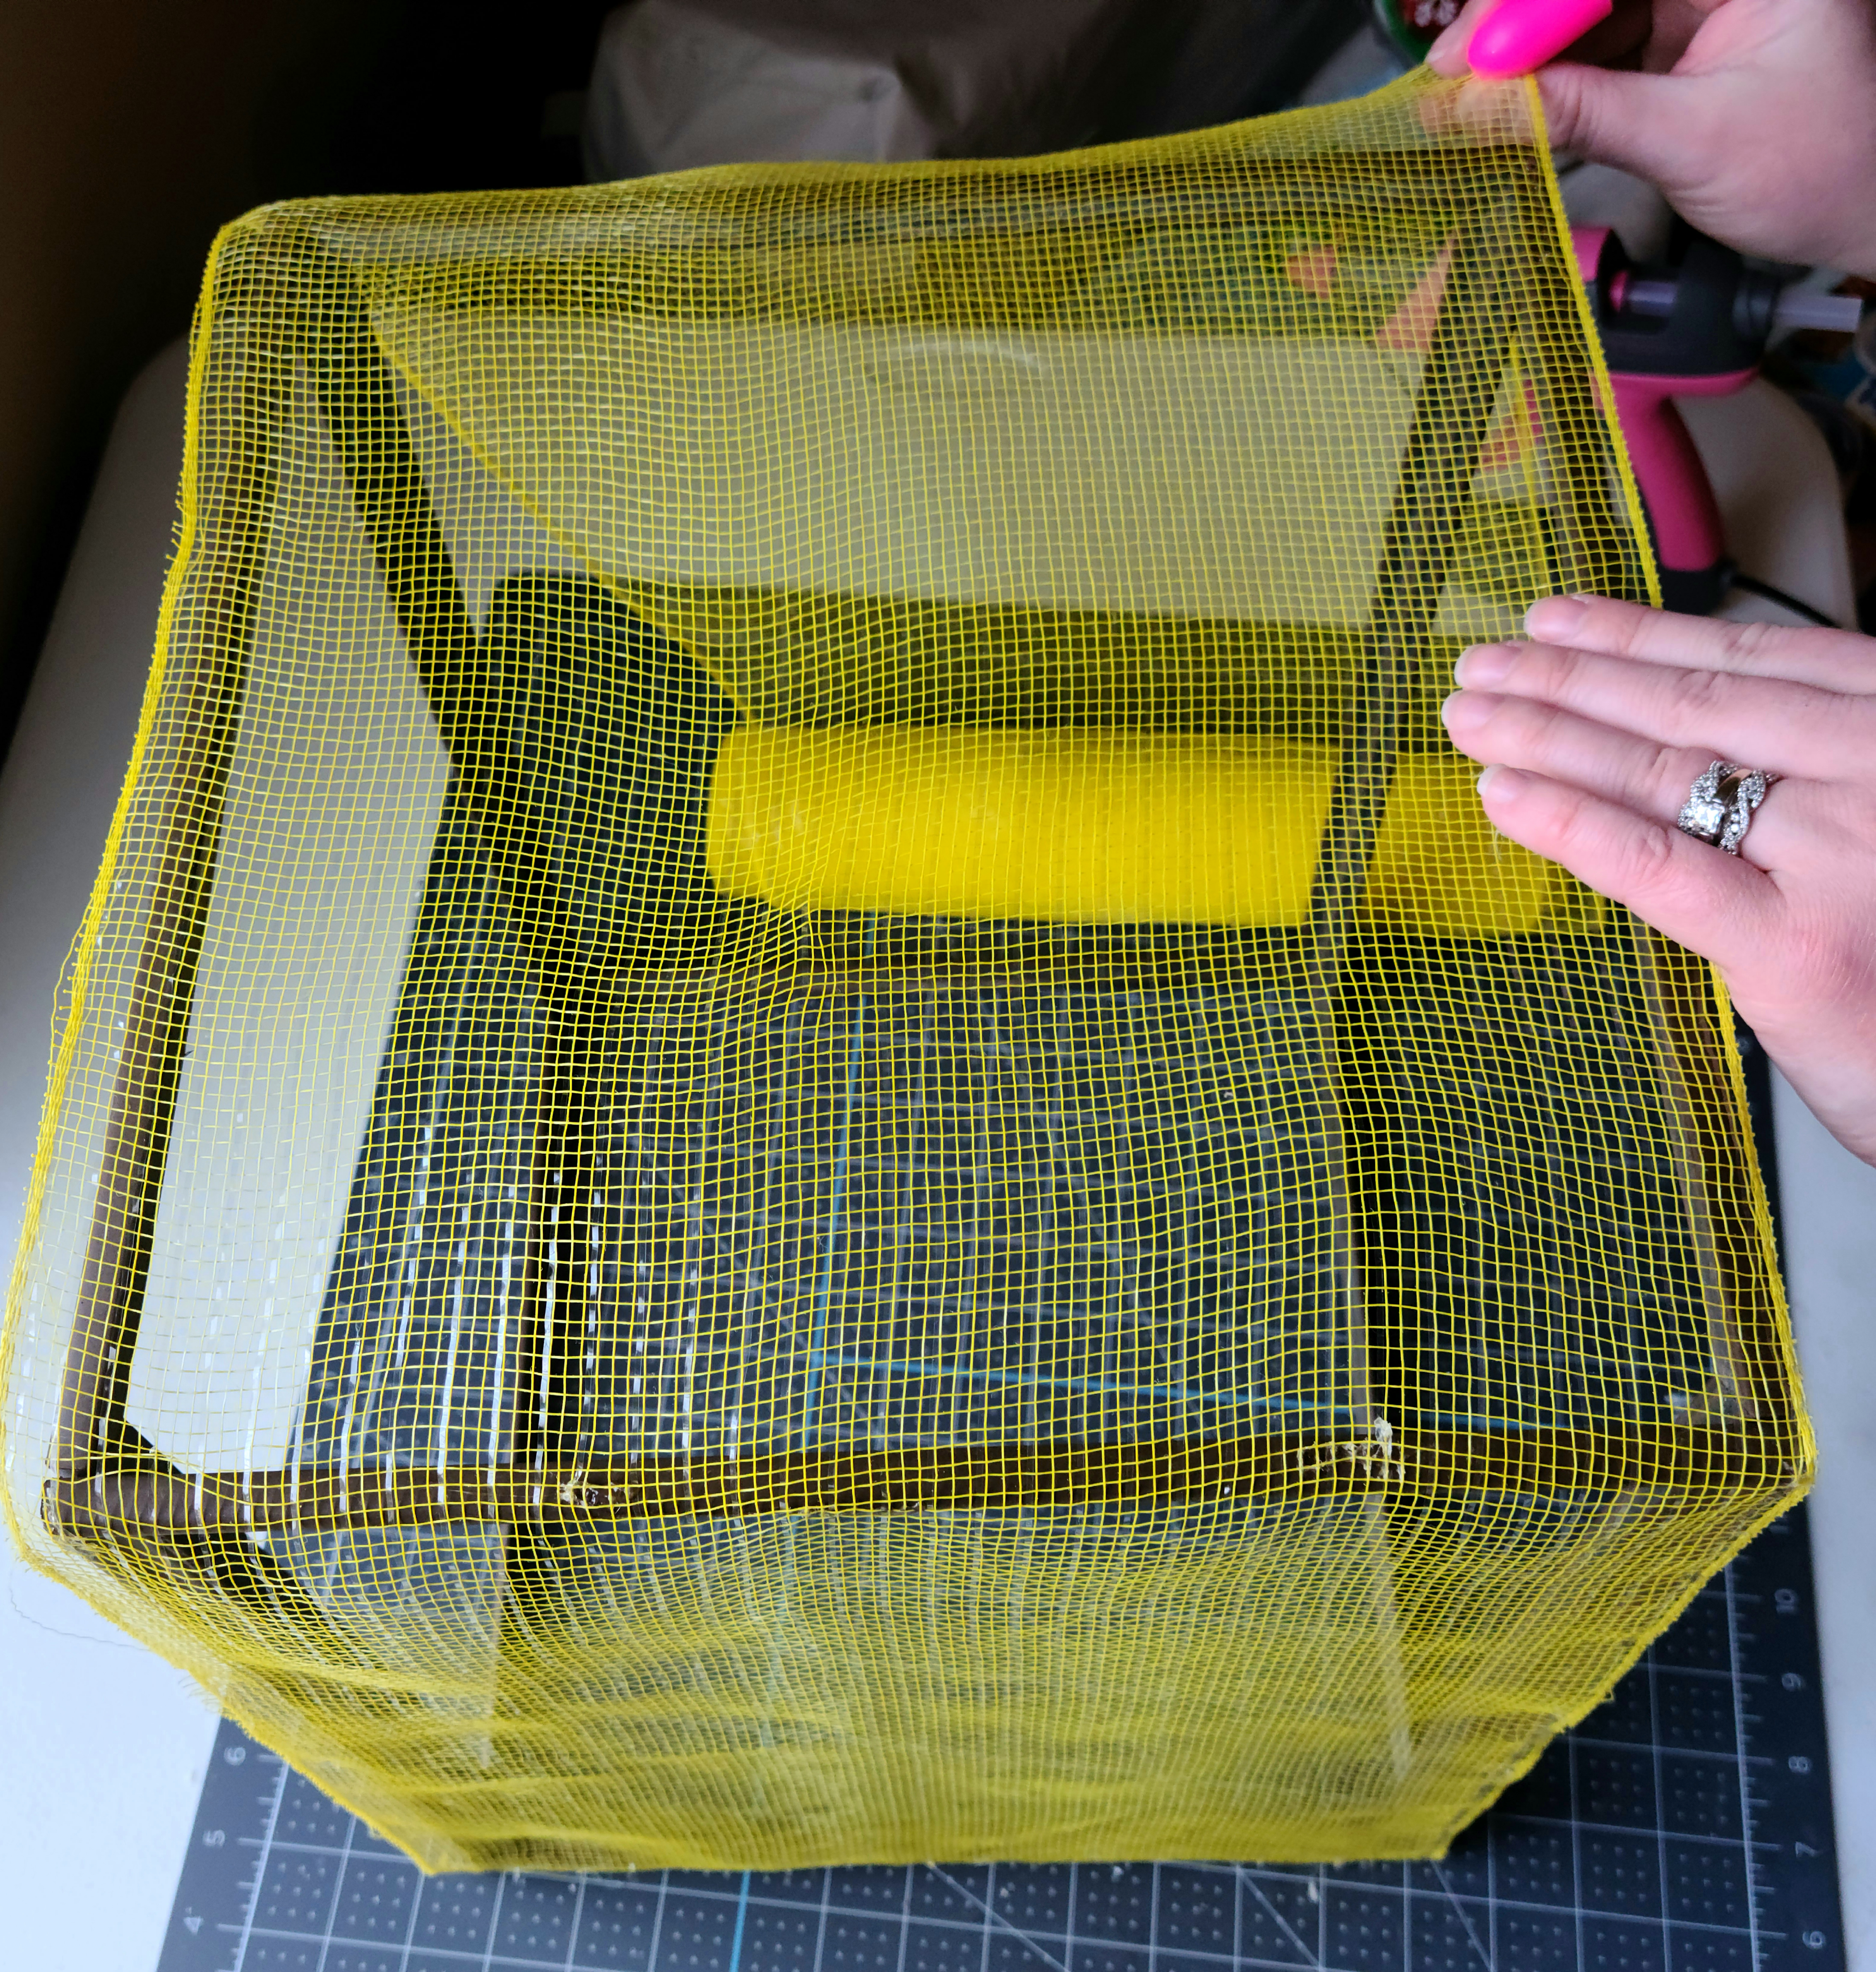 Gluing deco mesh to the second side of the frame of the DIY lighted gift box.